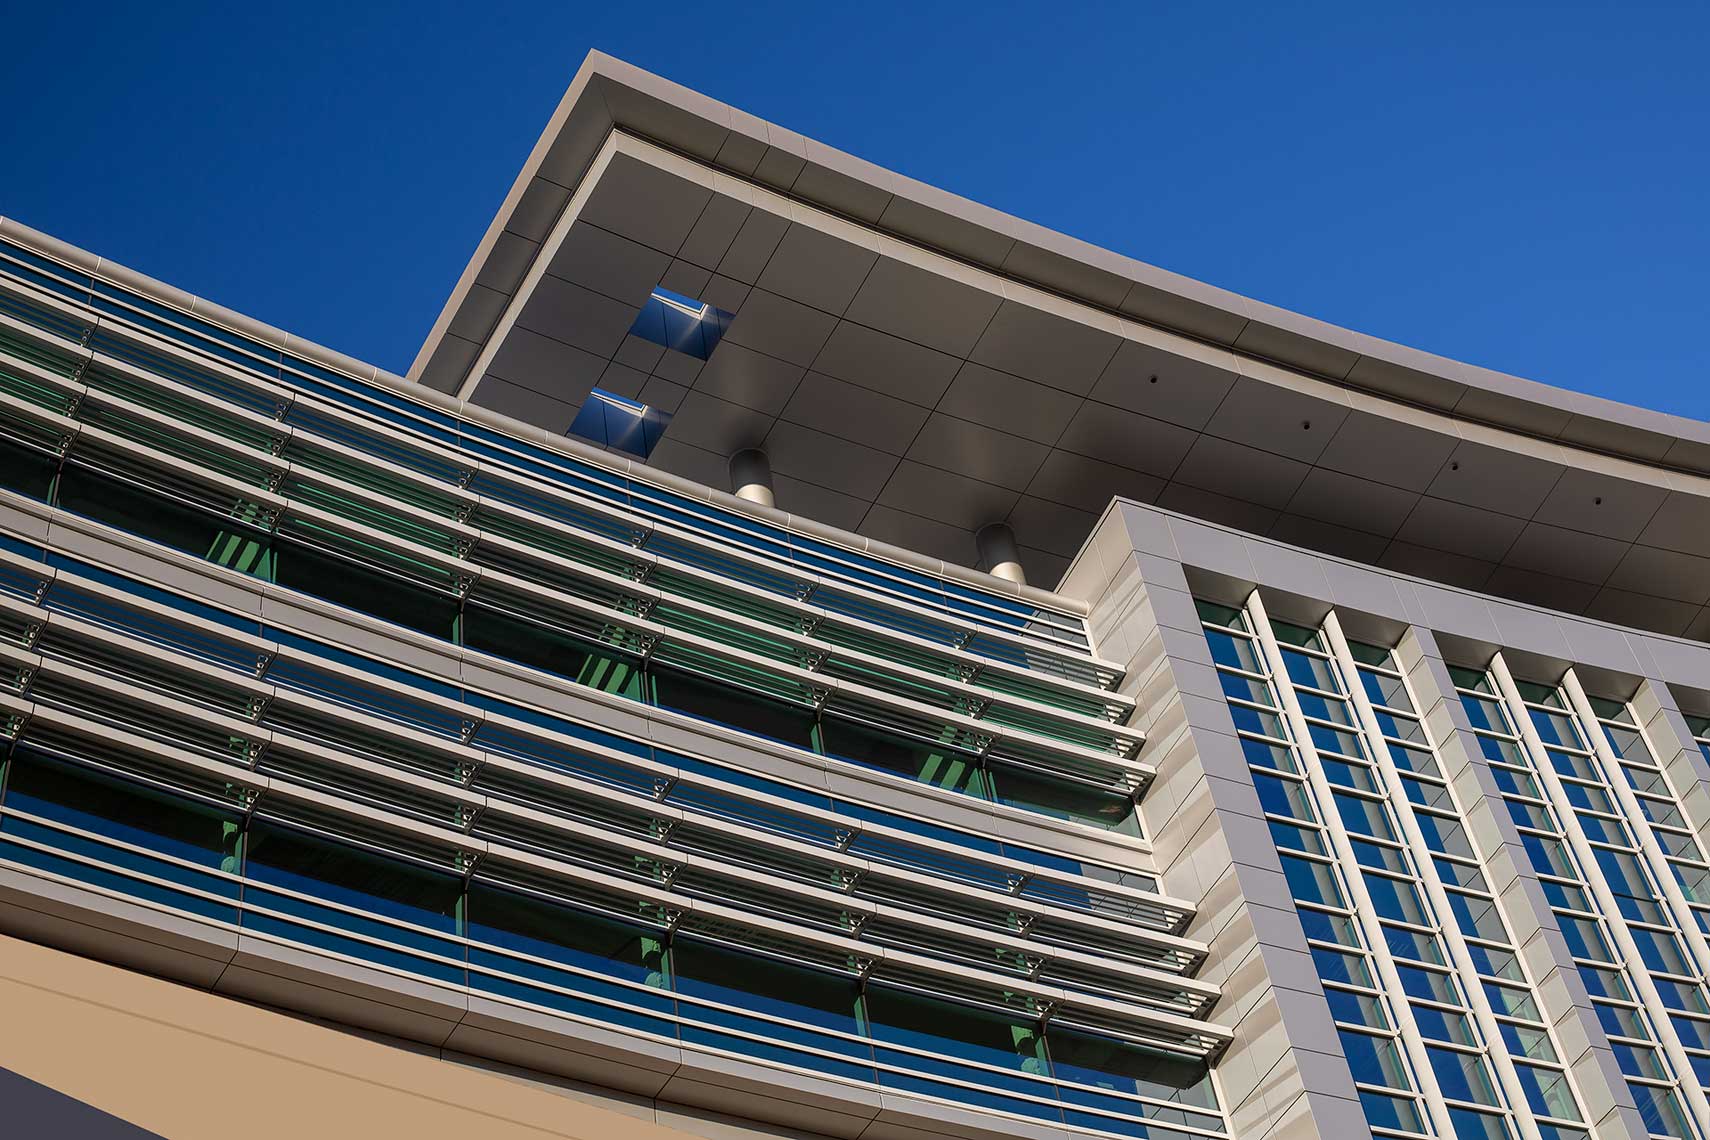 A bold detail of the architectural elements at Emory Johns Creek Hospital